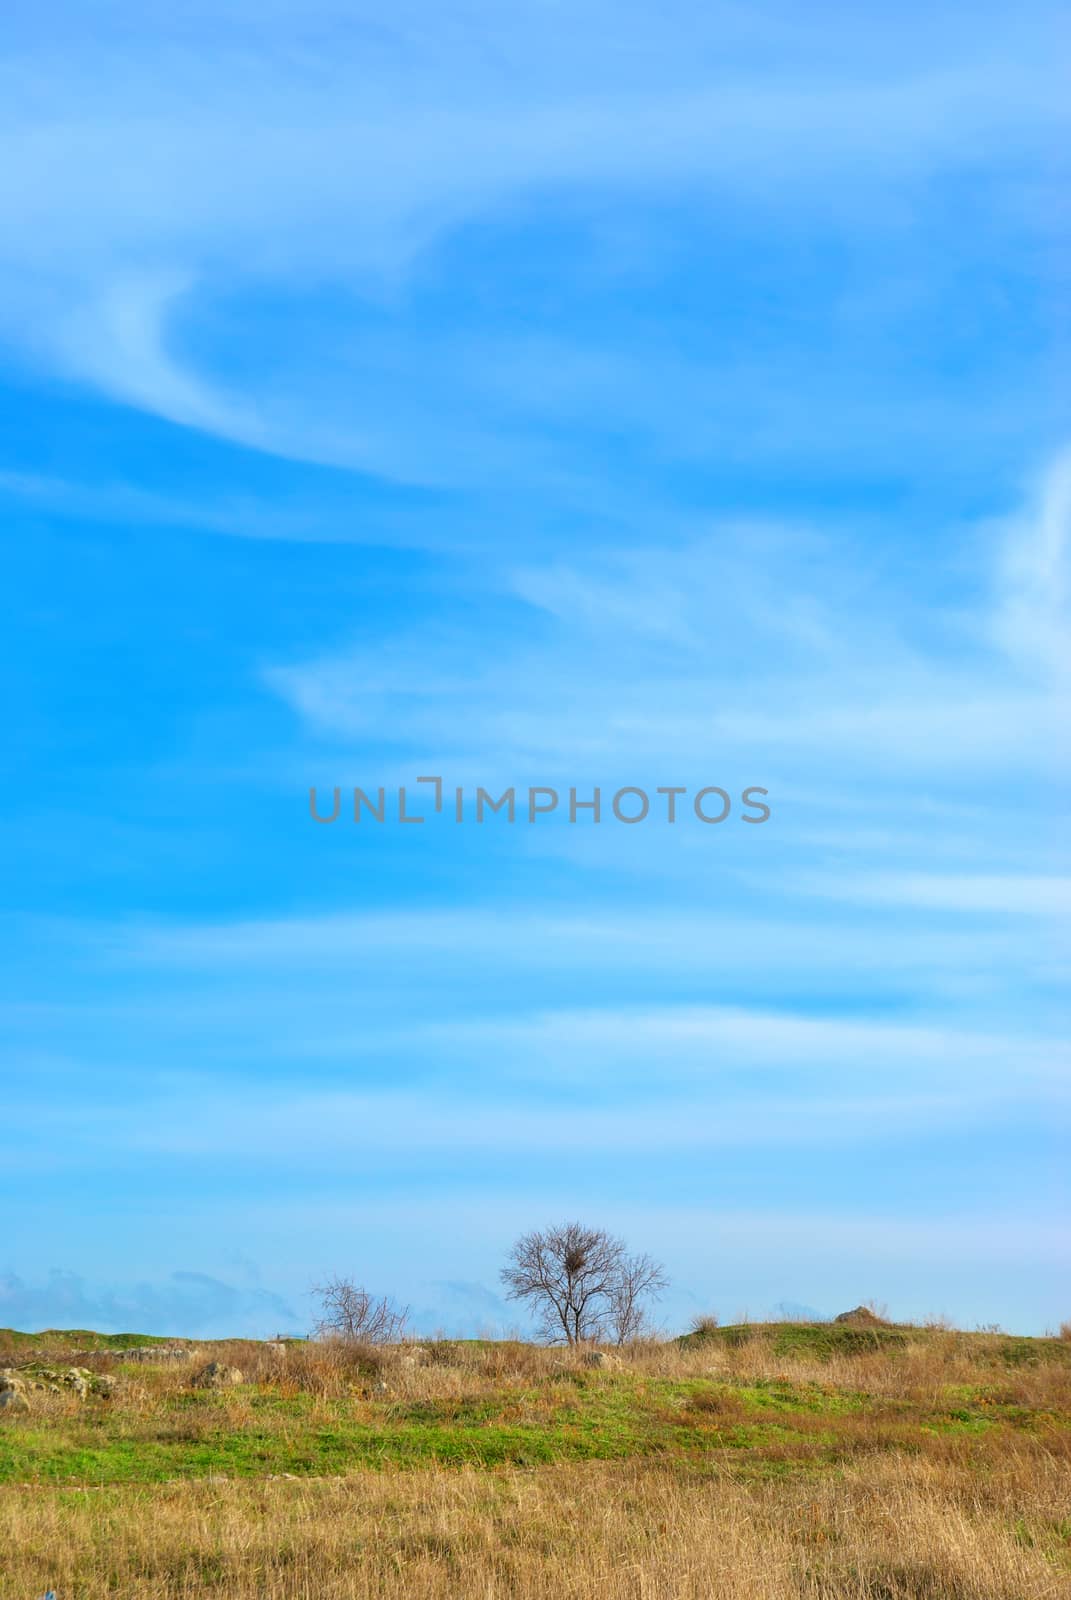 Landscape with a tree, field and blue sky.